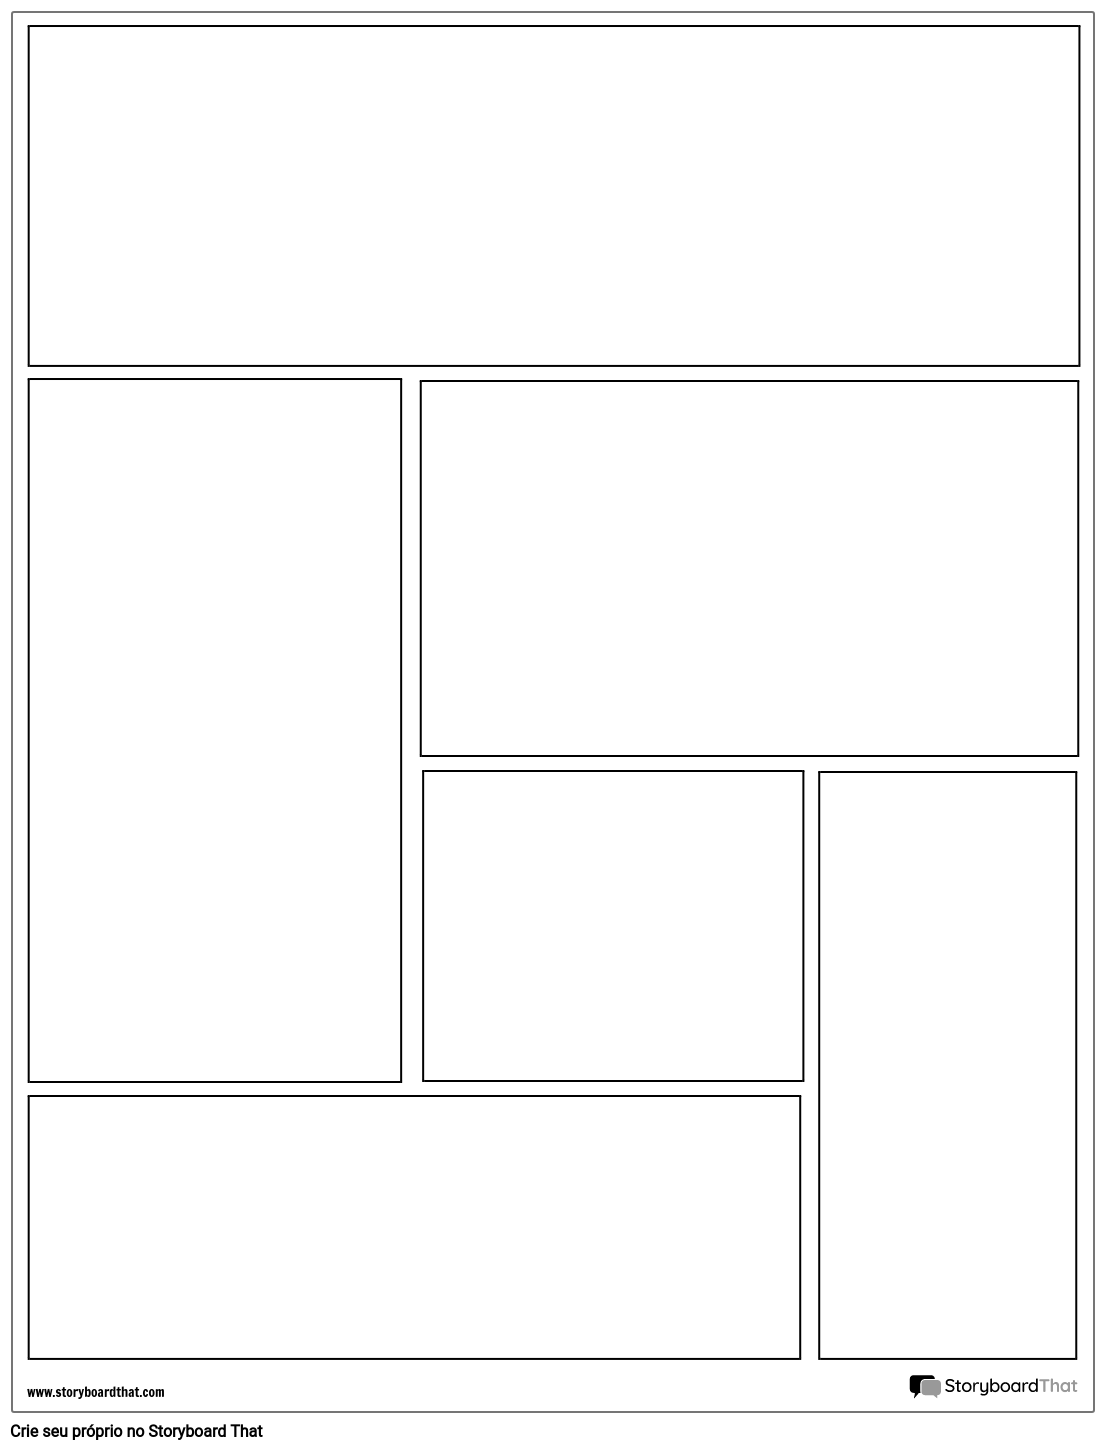 Layout De Romance Gráfico Storyboard By Pt Examples 7787